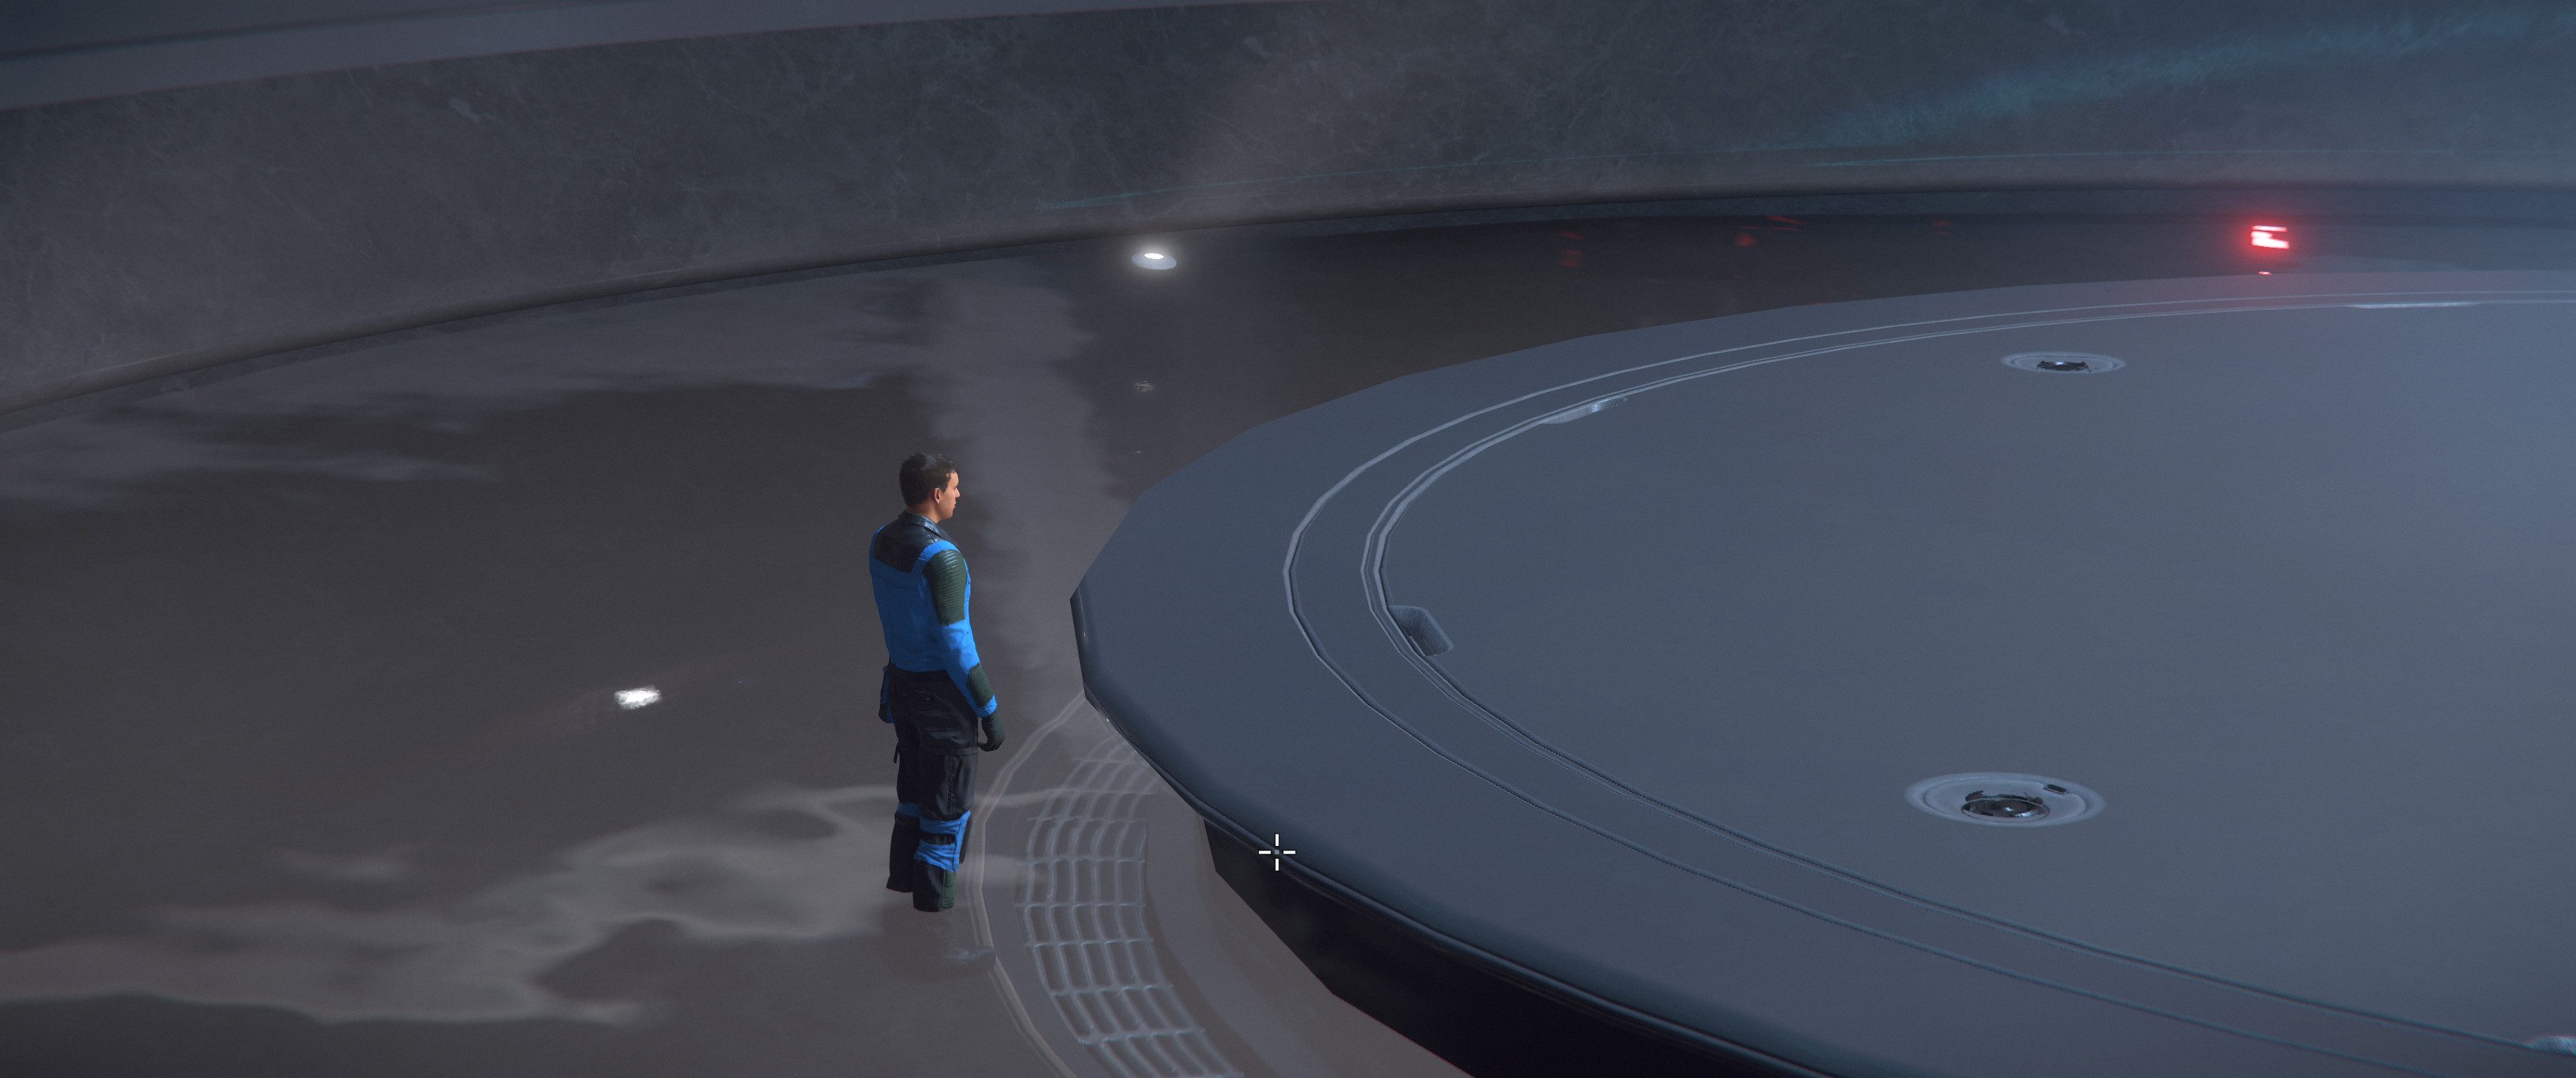 Zoomed view of a male NPC standing weirdly and motionlessly in what’s clearly a decorative pool, almost looking like he’s so lost in thought he wandered into the pool without realizing it